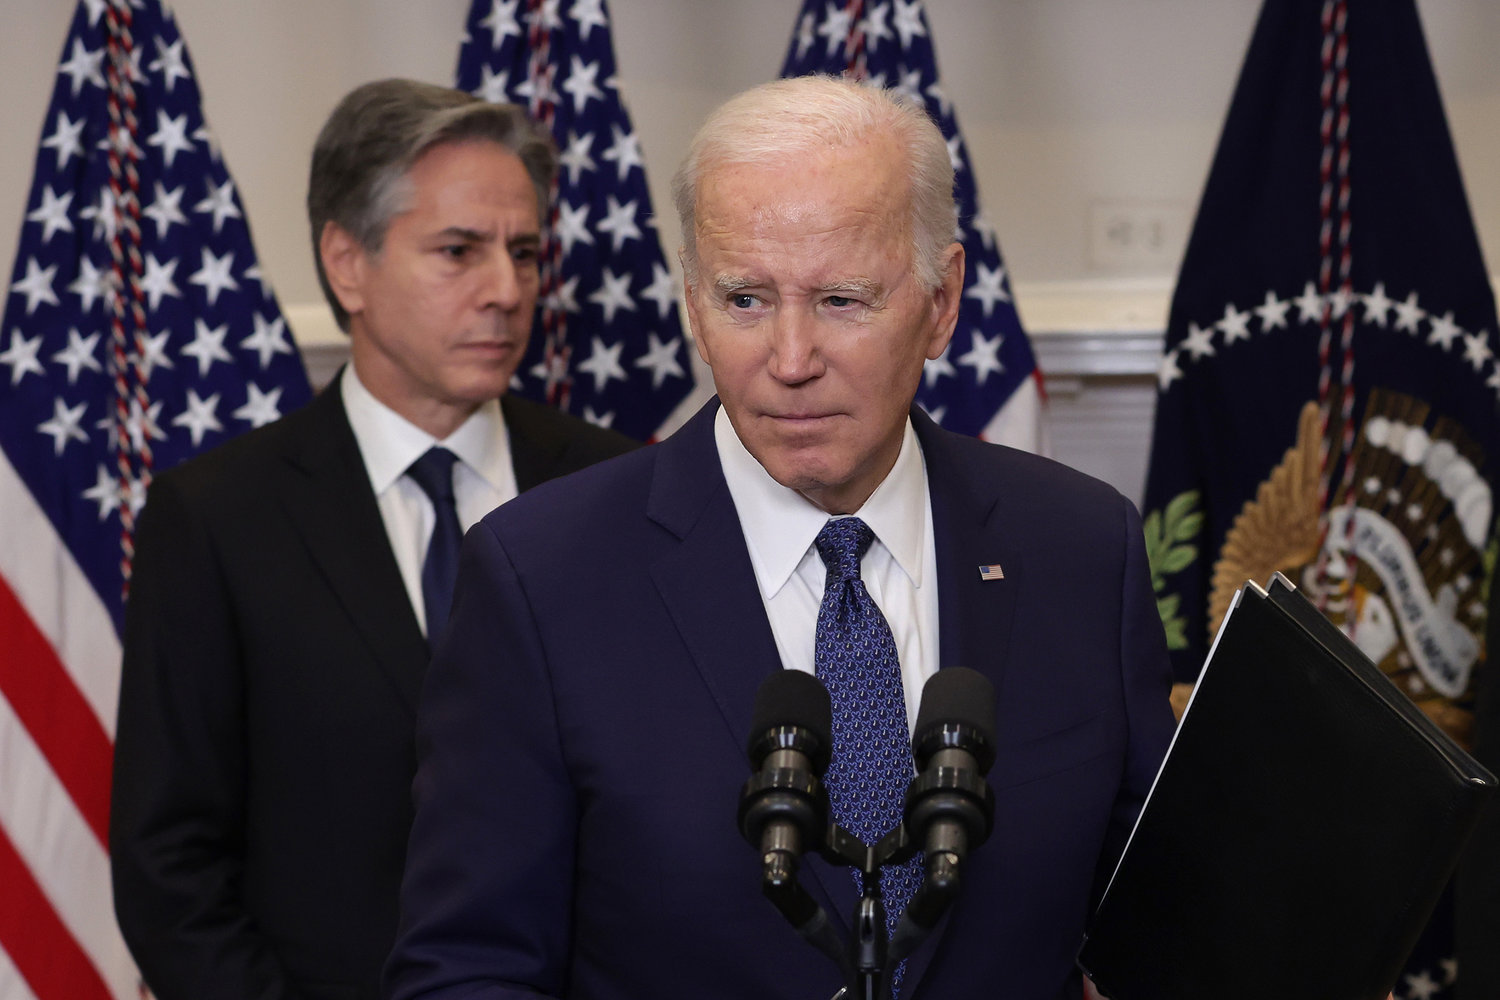 President Joe Biden makes an announcement on additional military support for Ukraine as Secretary of State Antony Blinken listens in the Roosevelt Room of the White House in Washington, D.C., on Jan. 25, 2023. (Alex Wong/Getty Images/TNS)